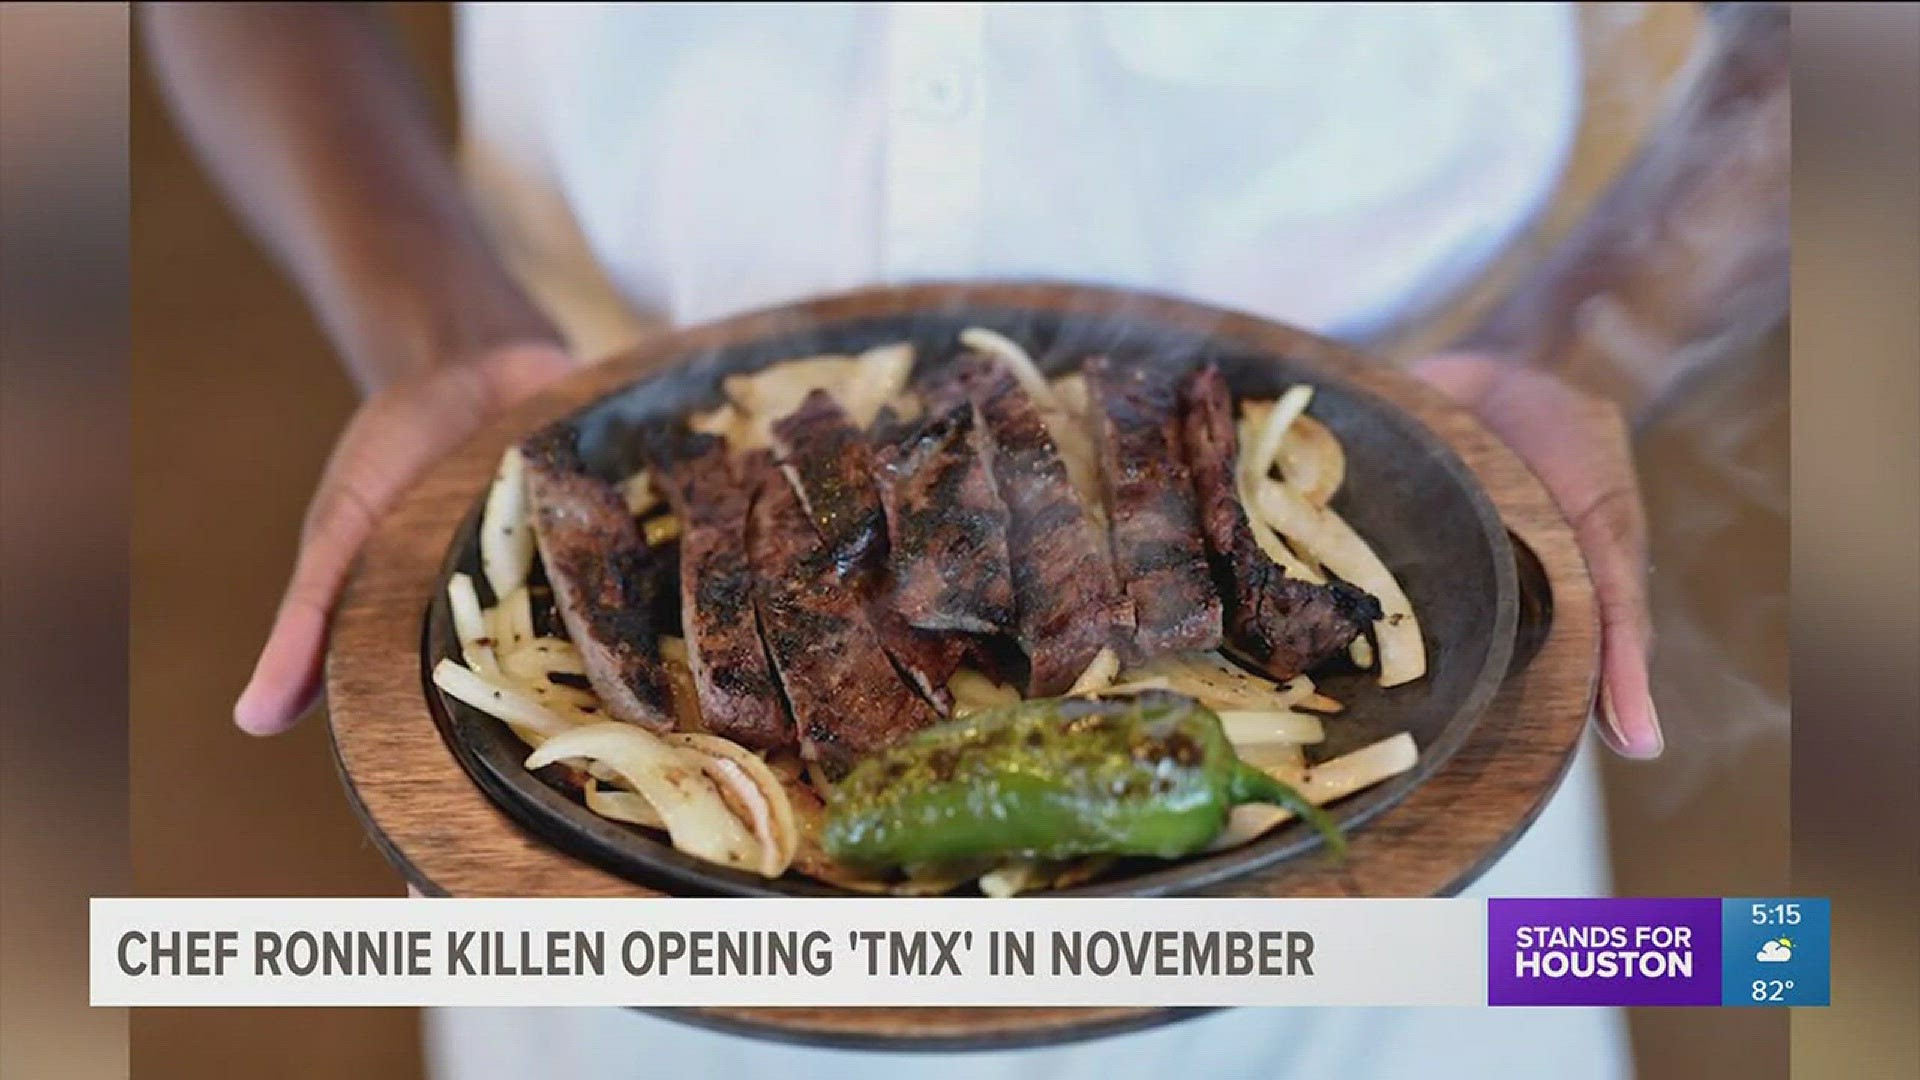 It's official, Chef Ronnie Killen of Killen's Barbecue will be opening a new Tex-Mex restaurant in Pearland this fall.